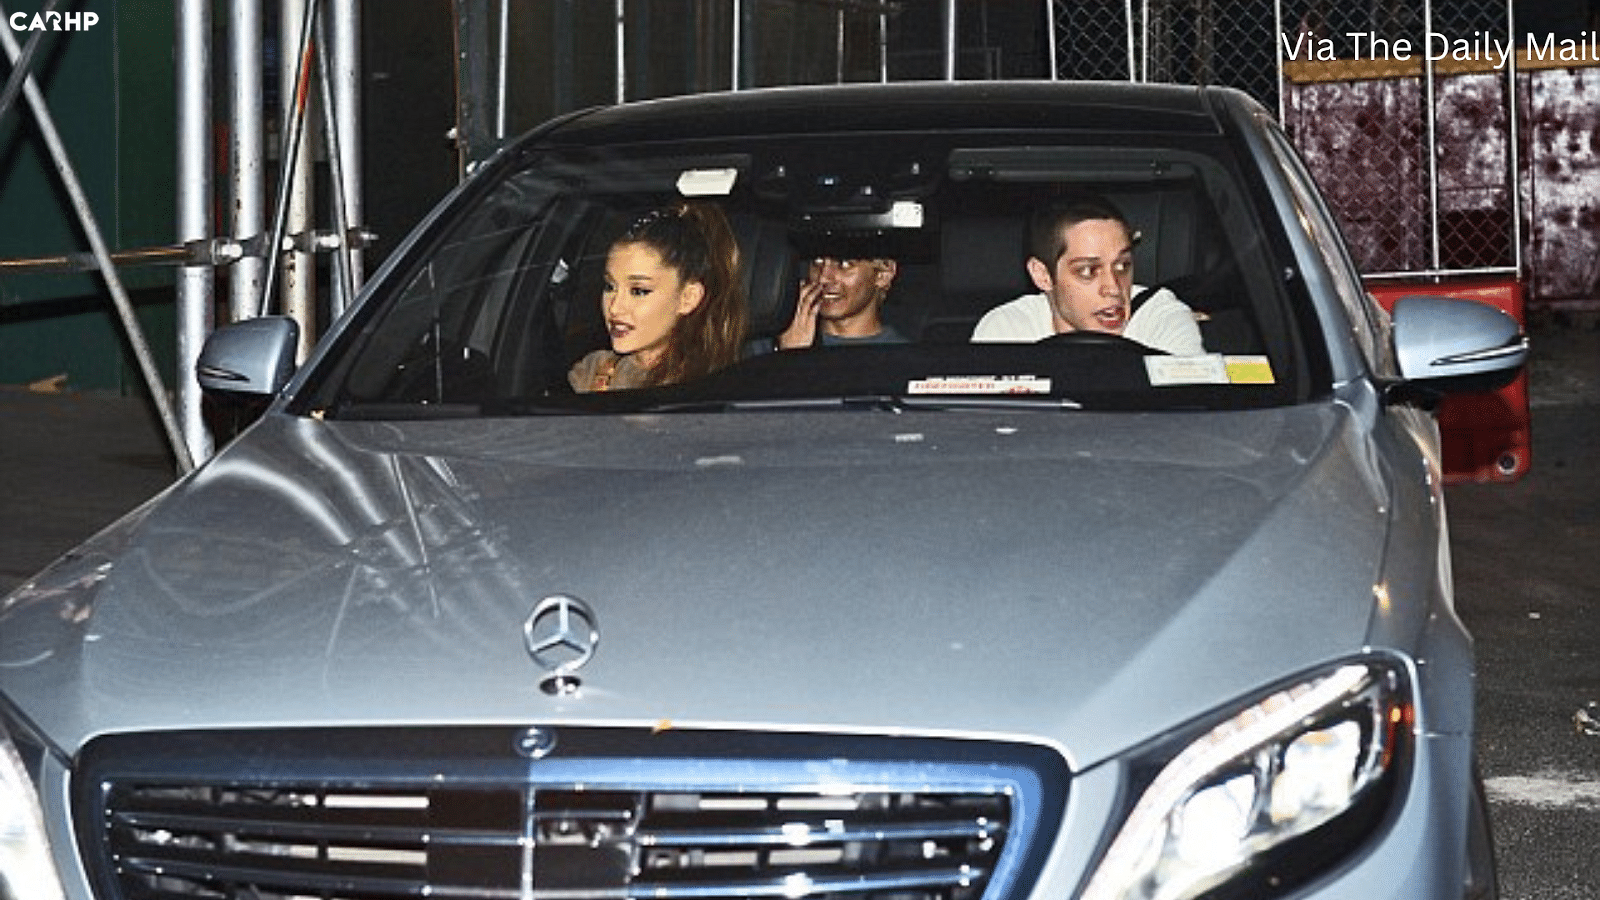 Ariana Grande's Maybach S600 - Mercedes-Maybach S600 - With Pete Davidson